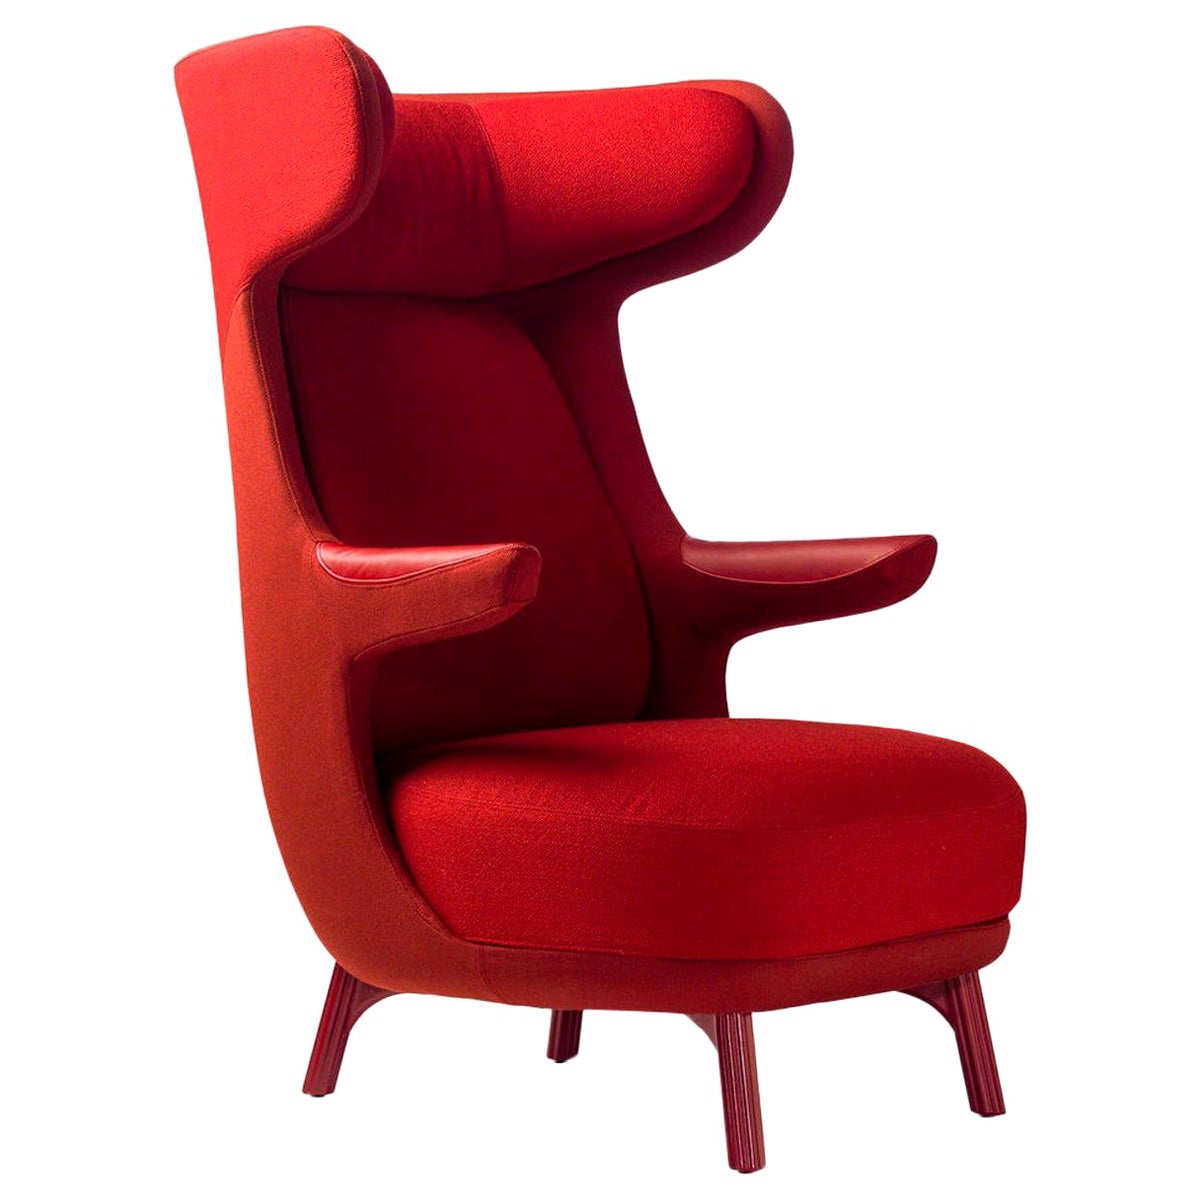 Jaime Hayon, Contemporary Monocolor Red Fabric Leather Upholstery Dino Armchair